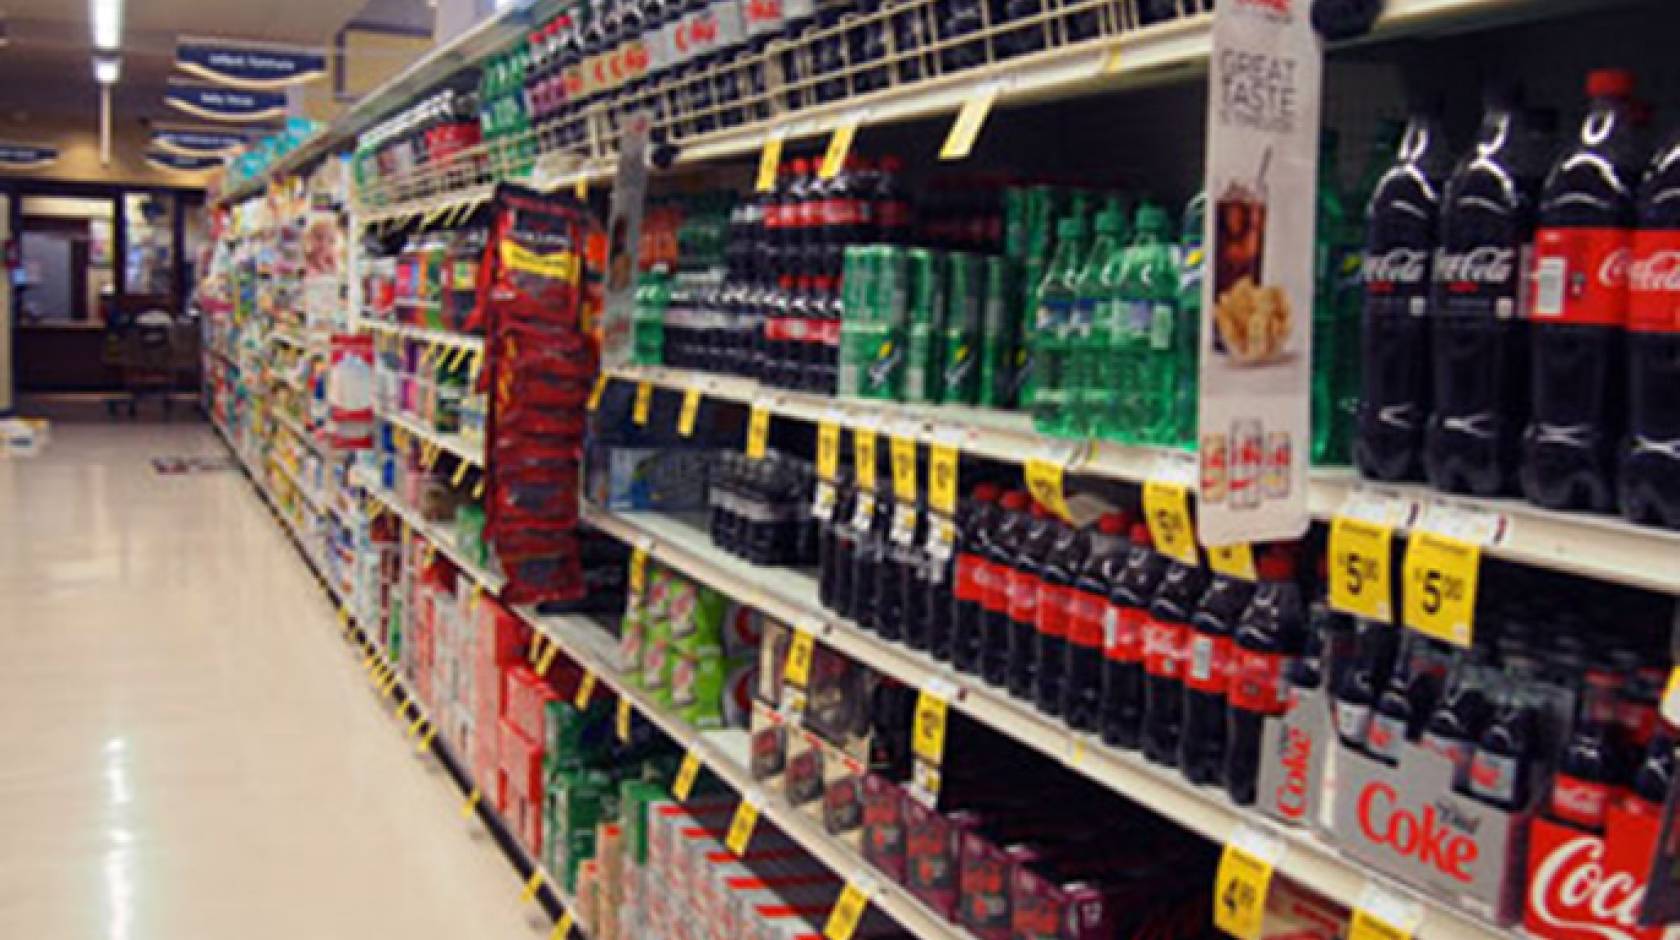 A new study finds that Berkeley’s soda tax led to higher retail prices of sugary drinks sold in the city.